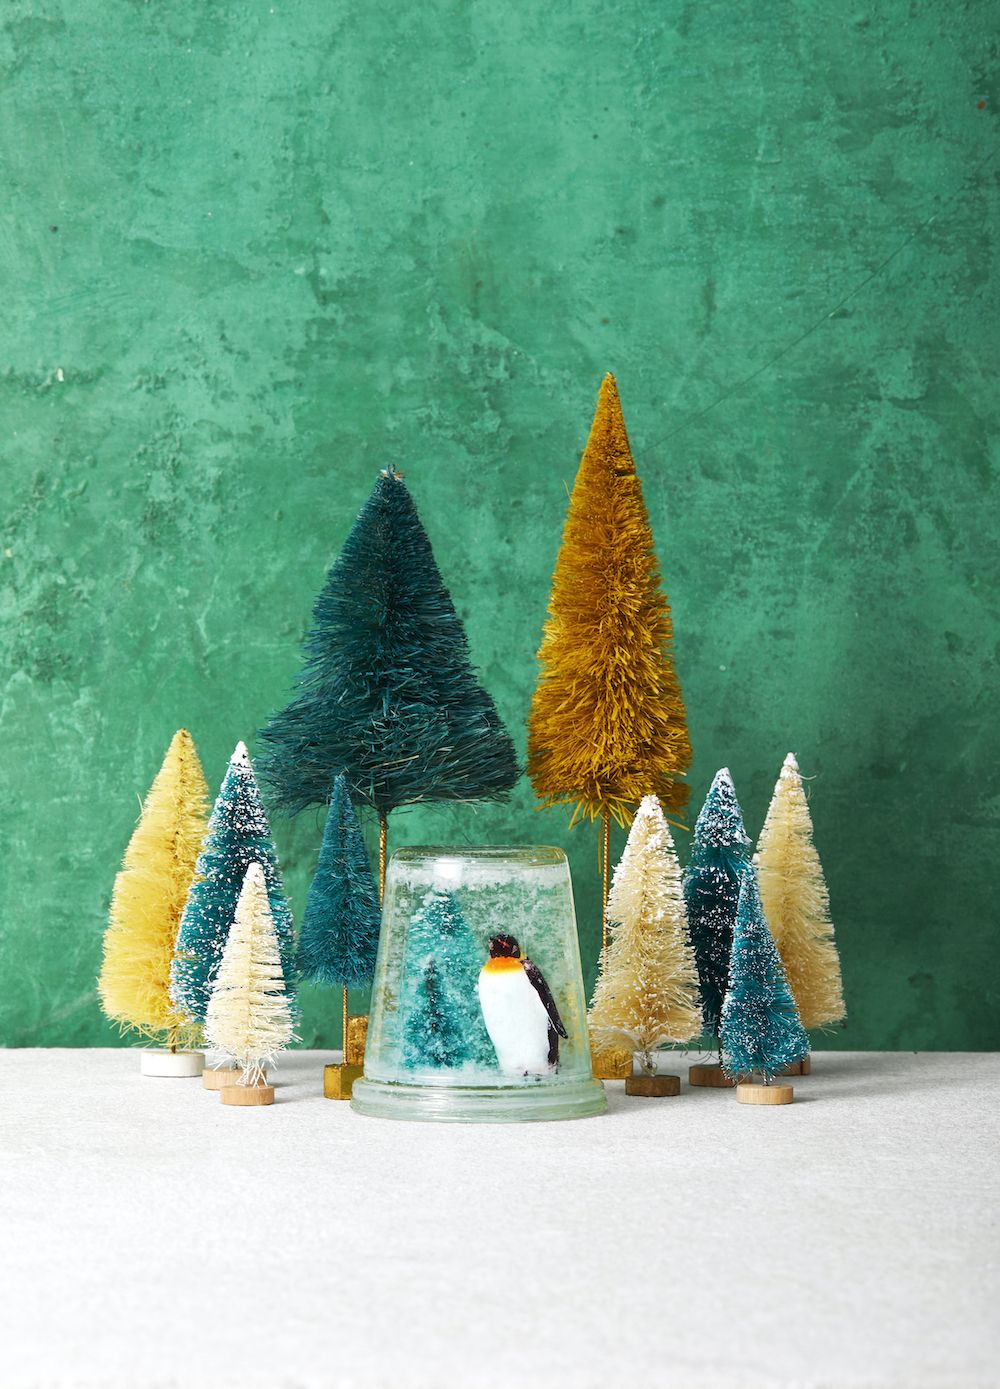 50 Easy Christmas Crafts for Kids - Free Holiday Projects